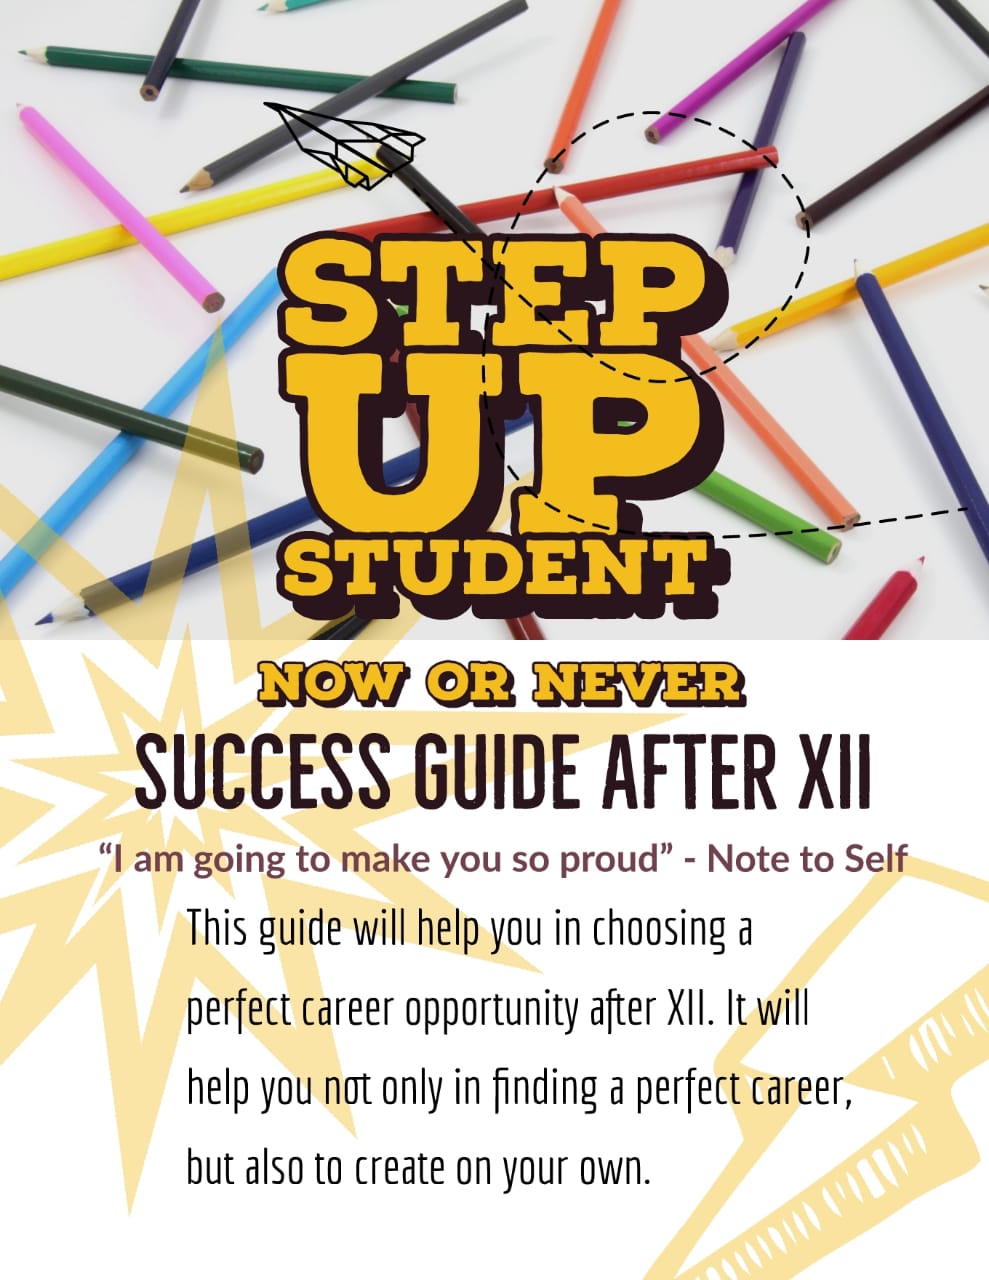 SUCCESS GUIDE AFTER XII – Design Your Career Ownself!